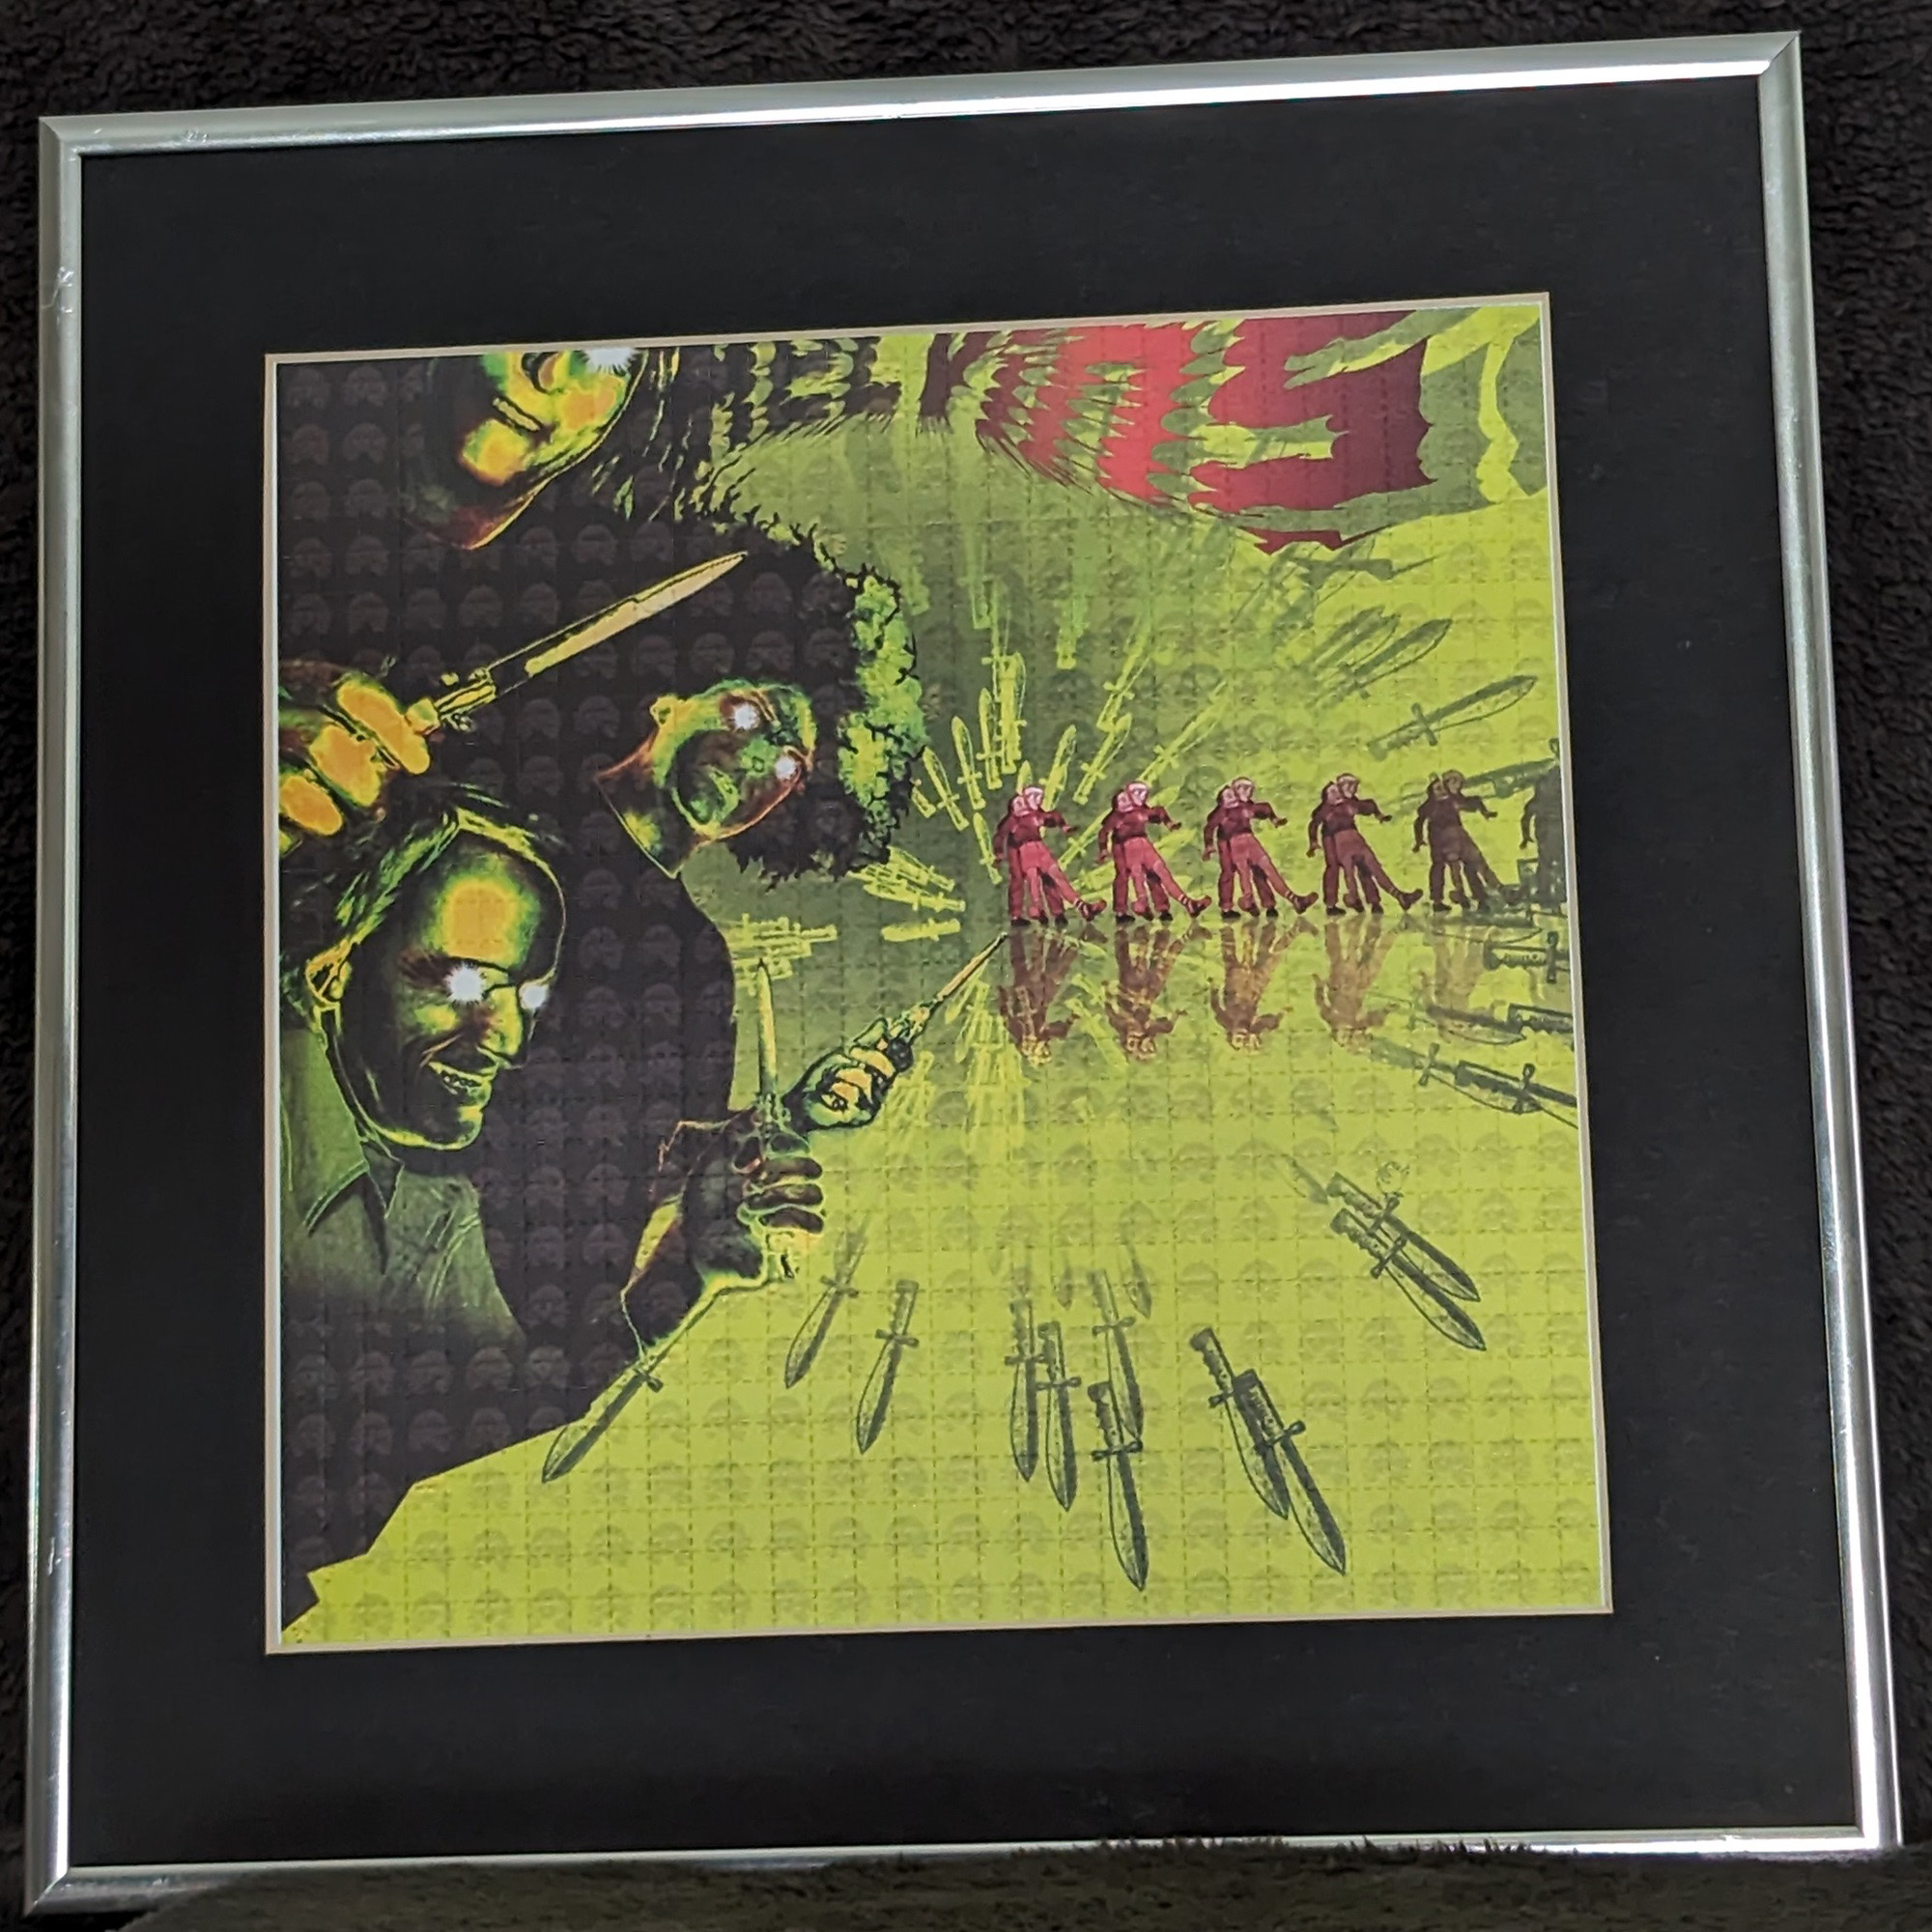 Just an example of how cool this unsigned blotter art looks when it's framed.